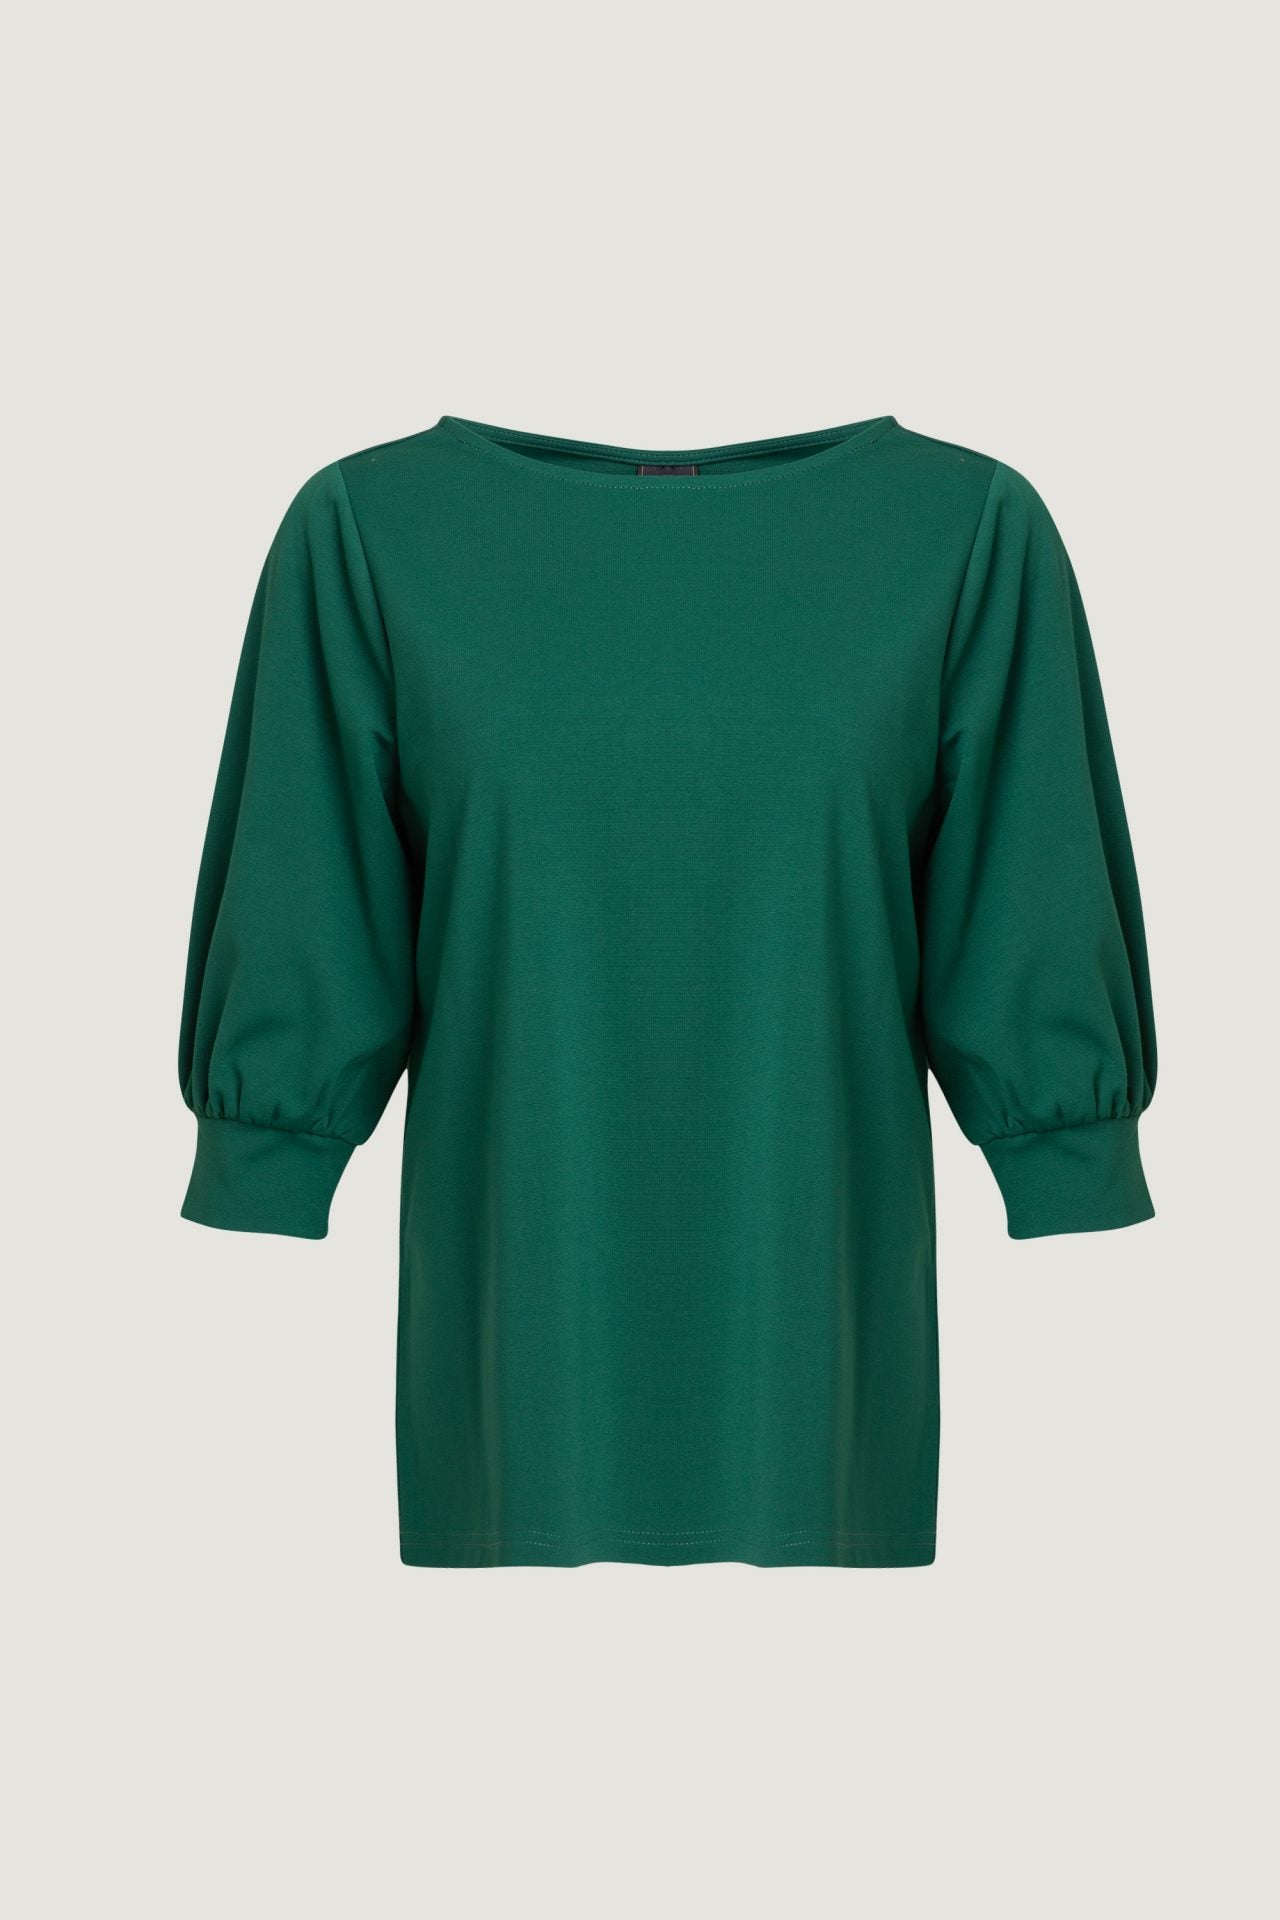 ATB 7295 GREEN GATHERED SLEEVE BLOUSE